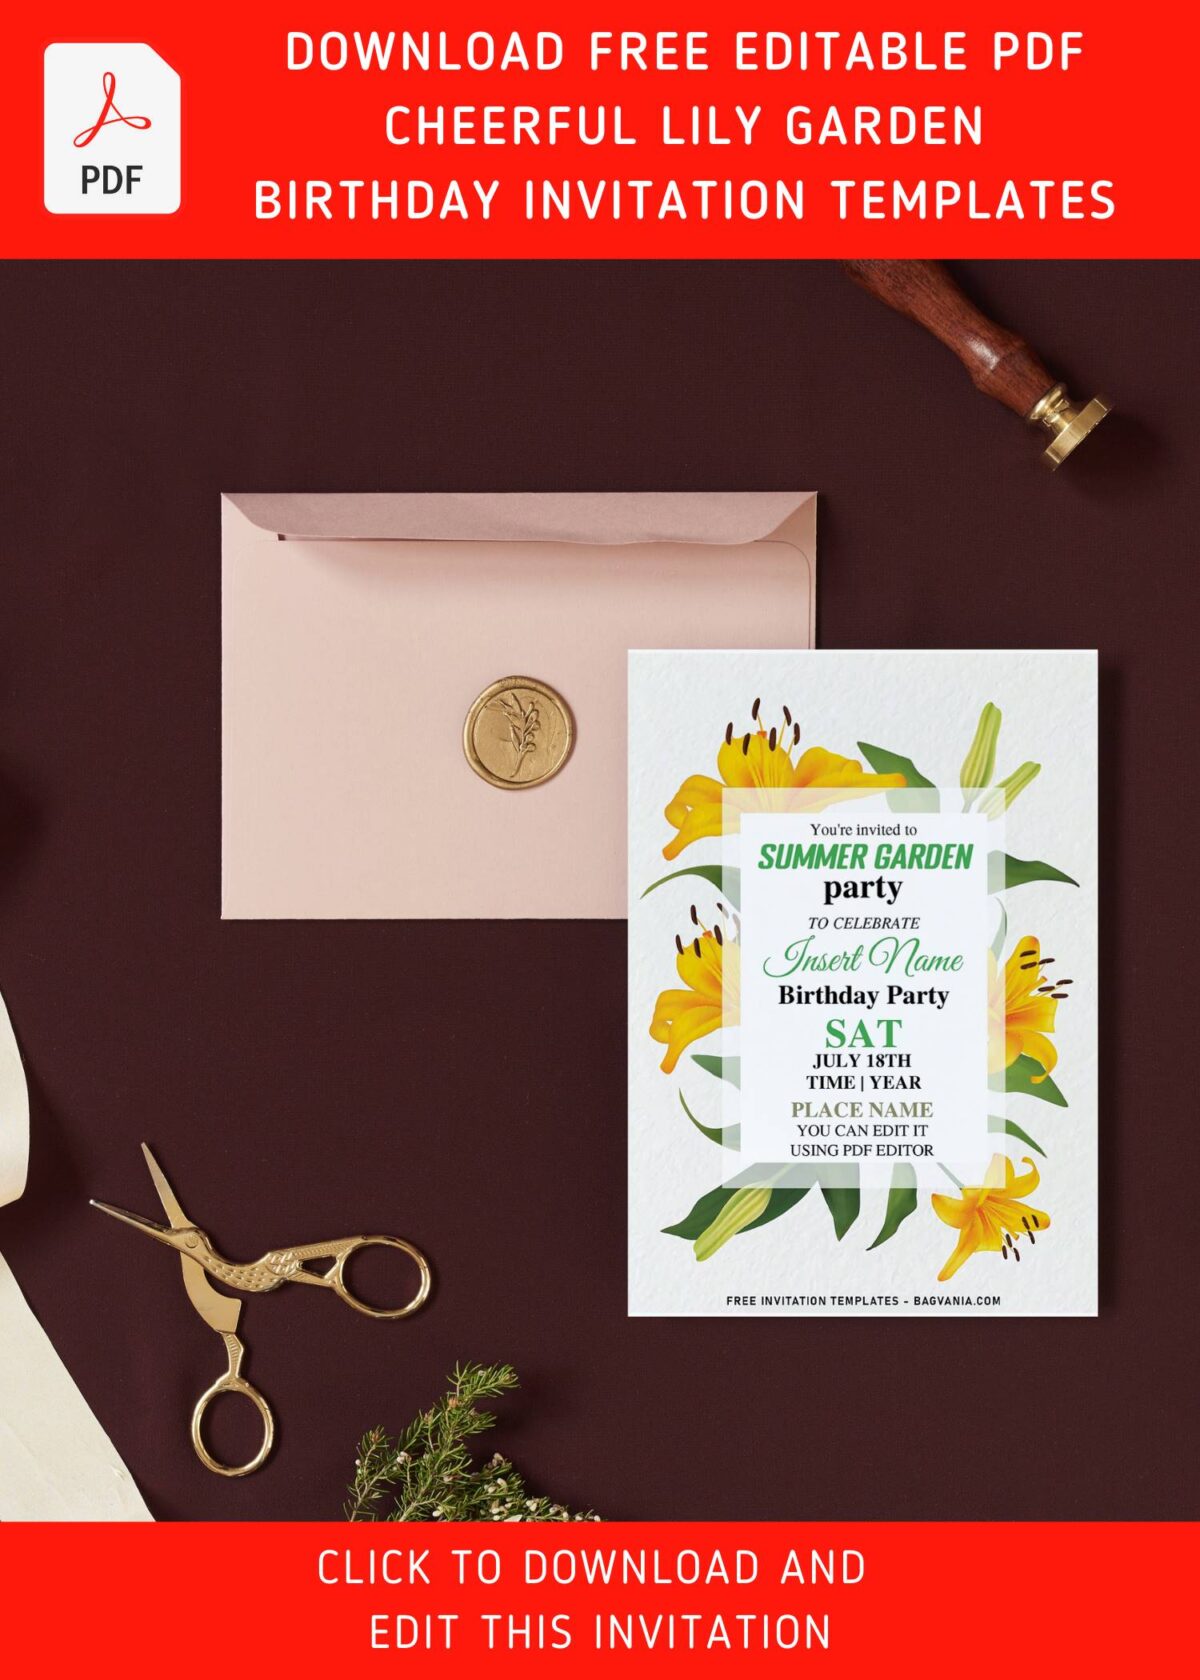 (Free Editable PDF) Cheerful Fall-Blooming Lily Garden Birthday Invitation Templates with 